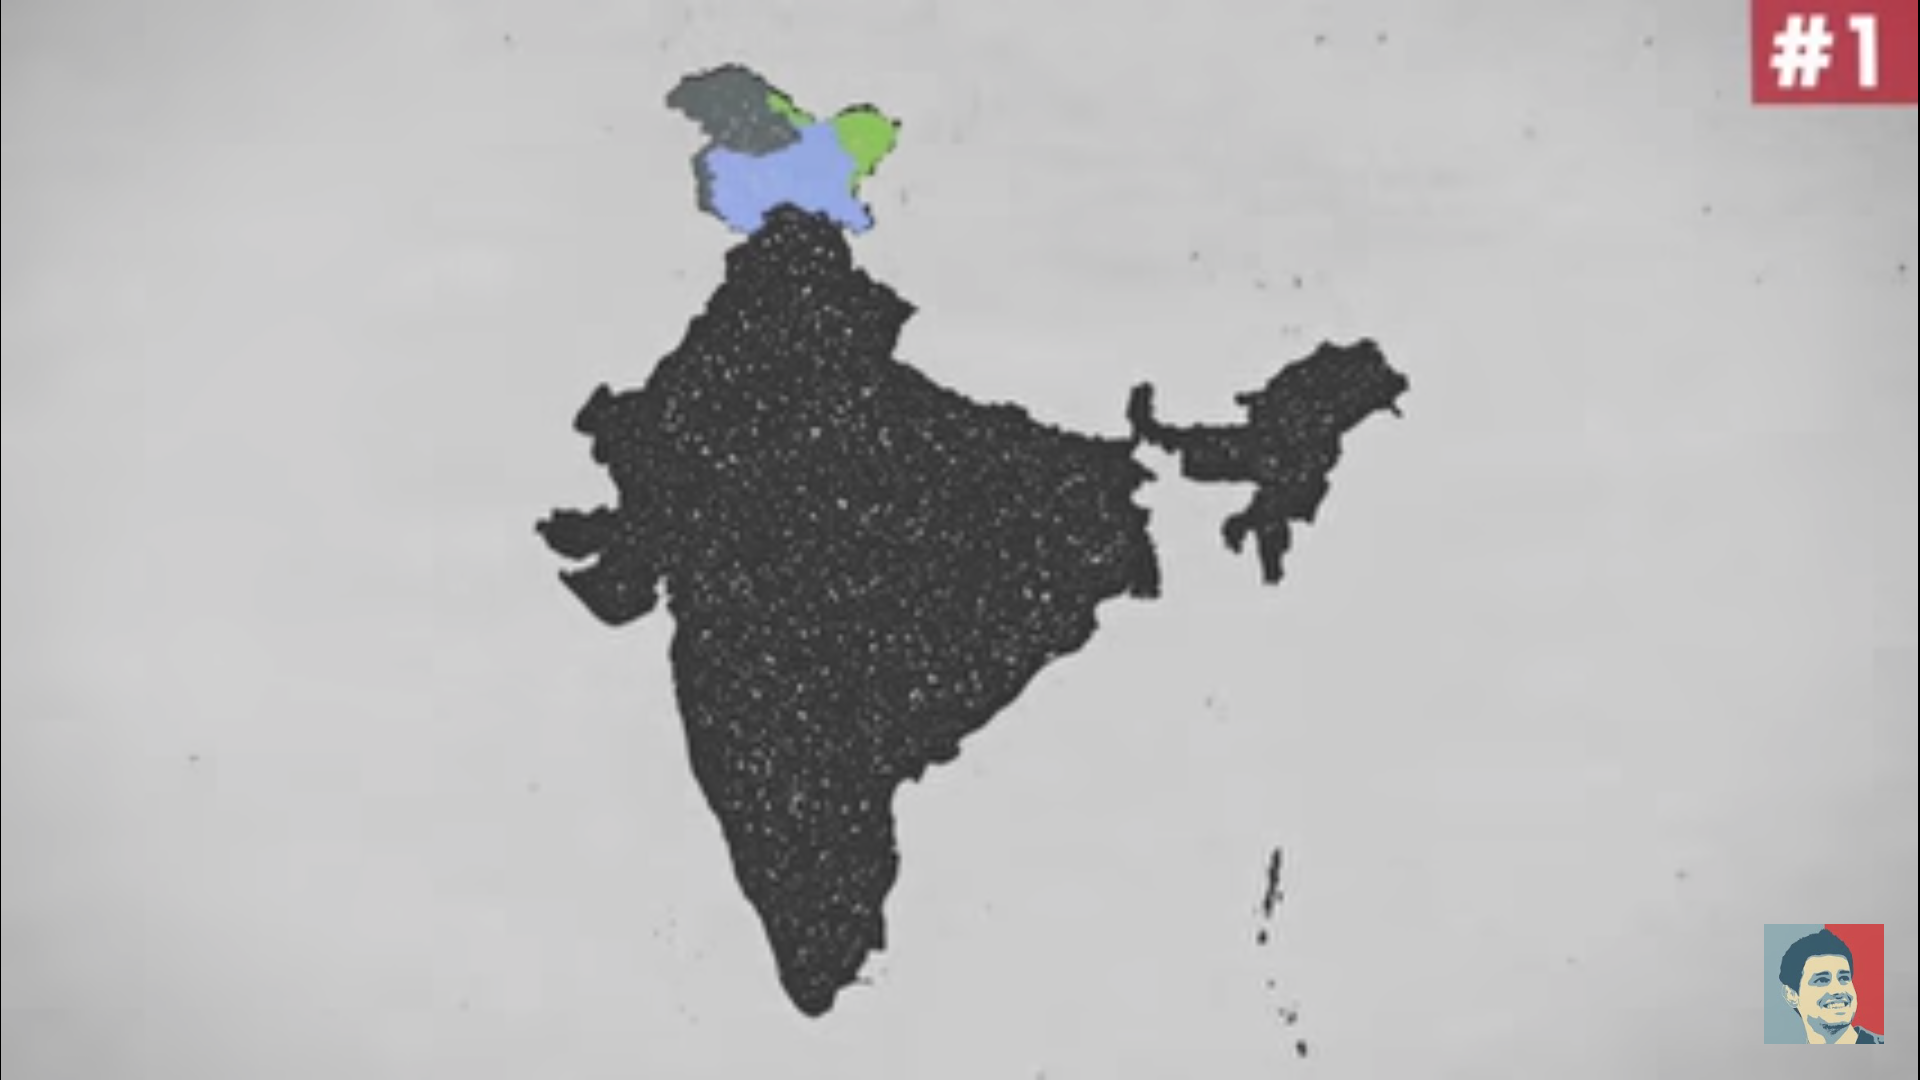 Is Akhand Bharat possible? If yes then how? Let's find out